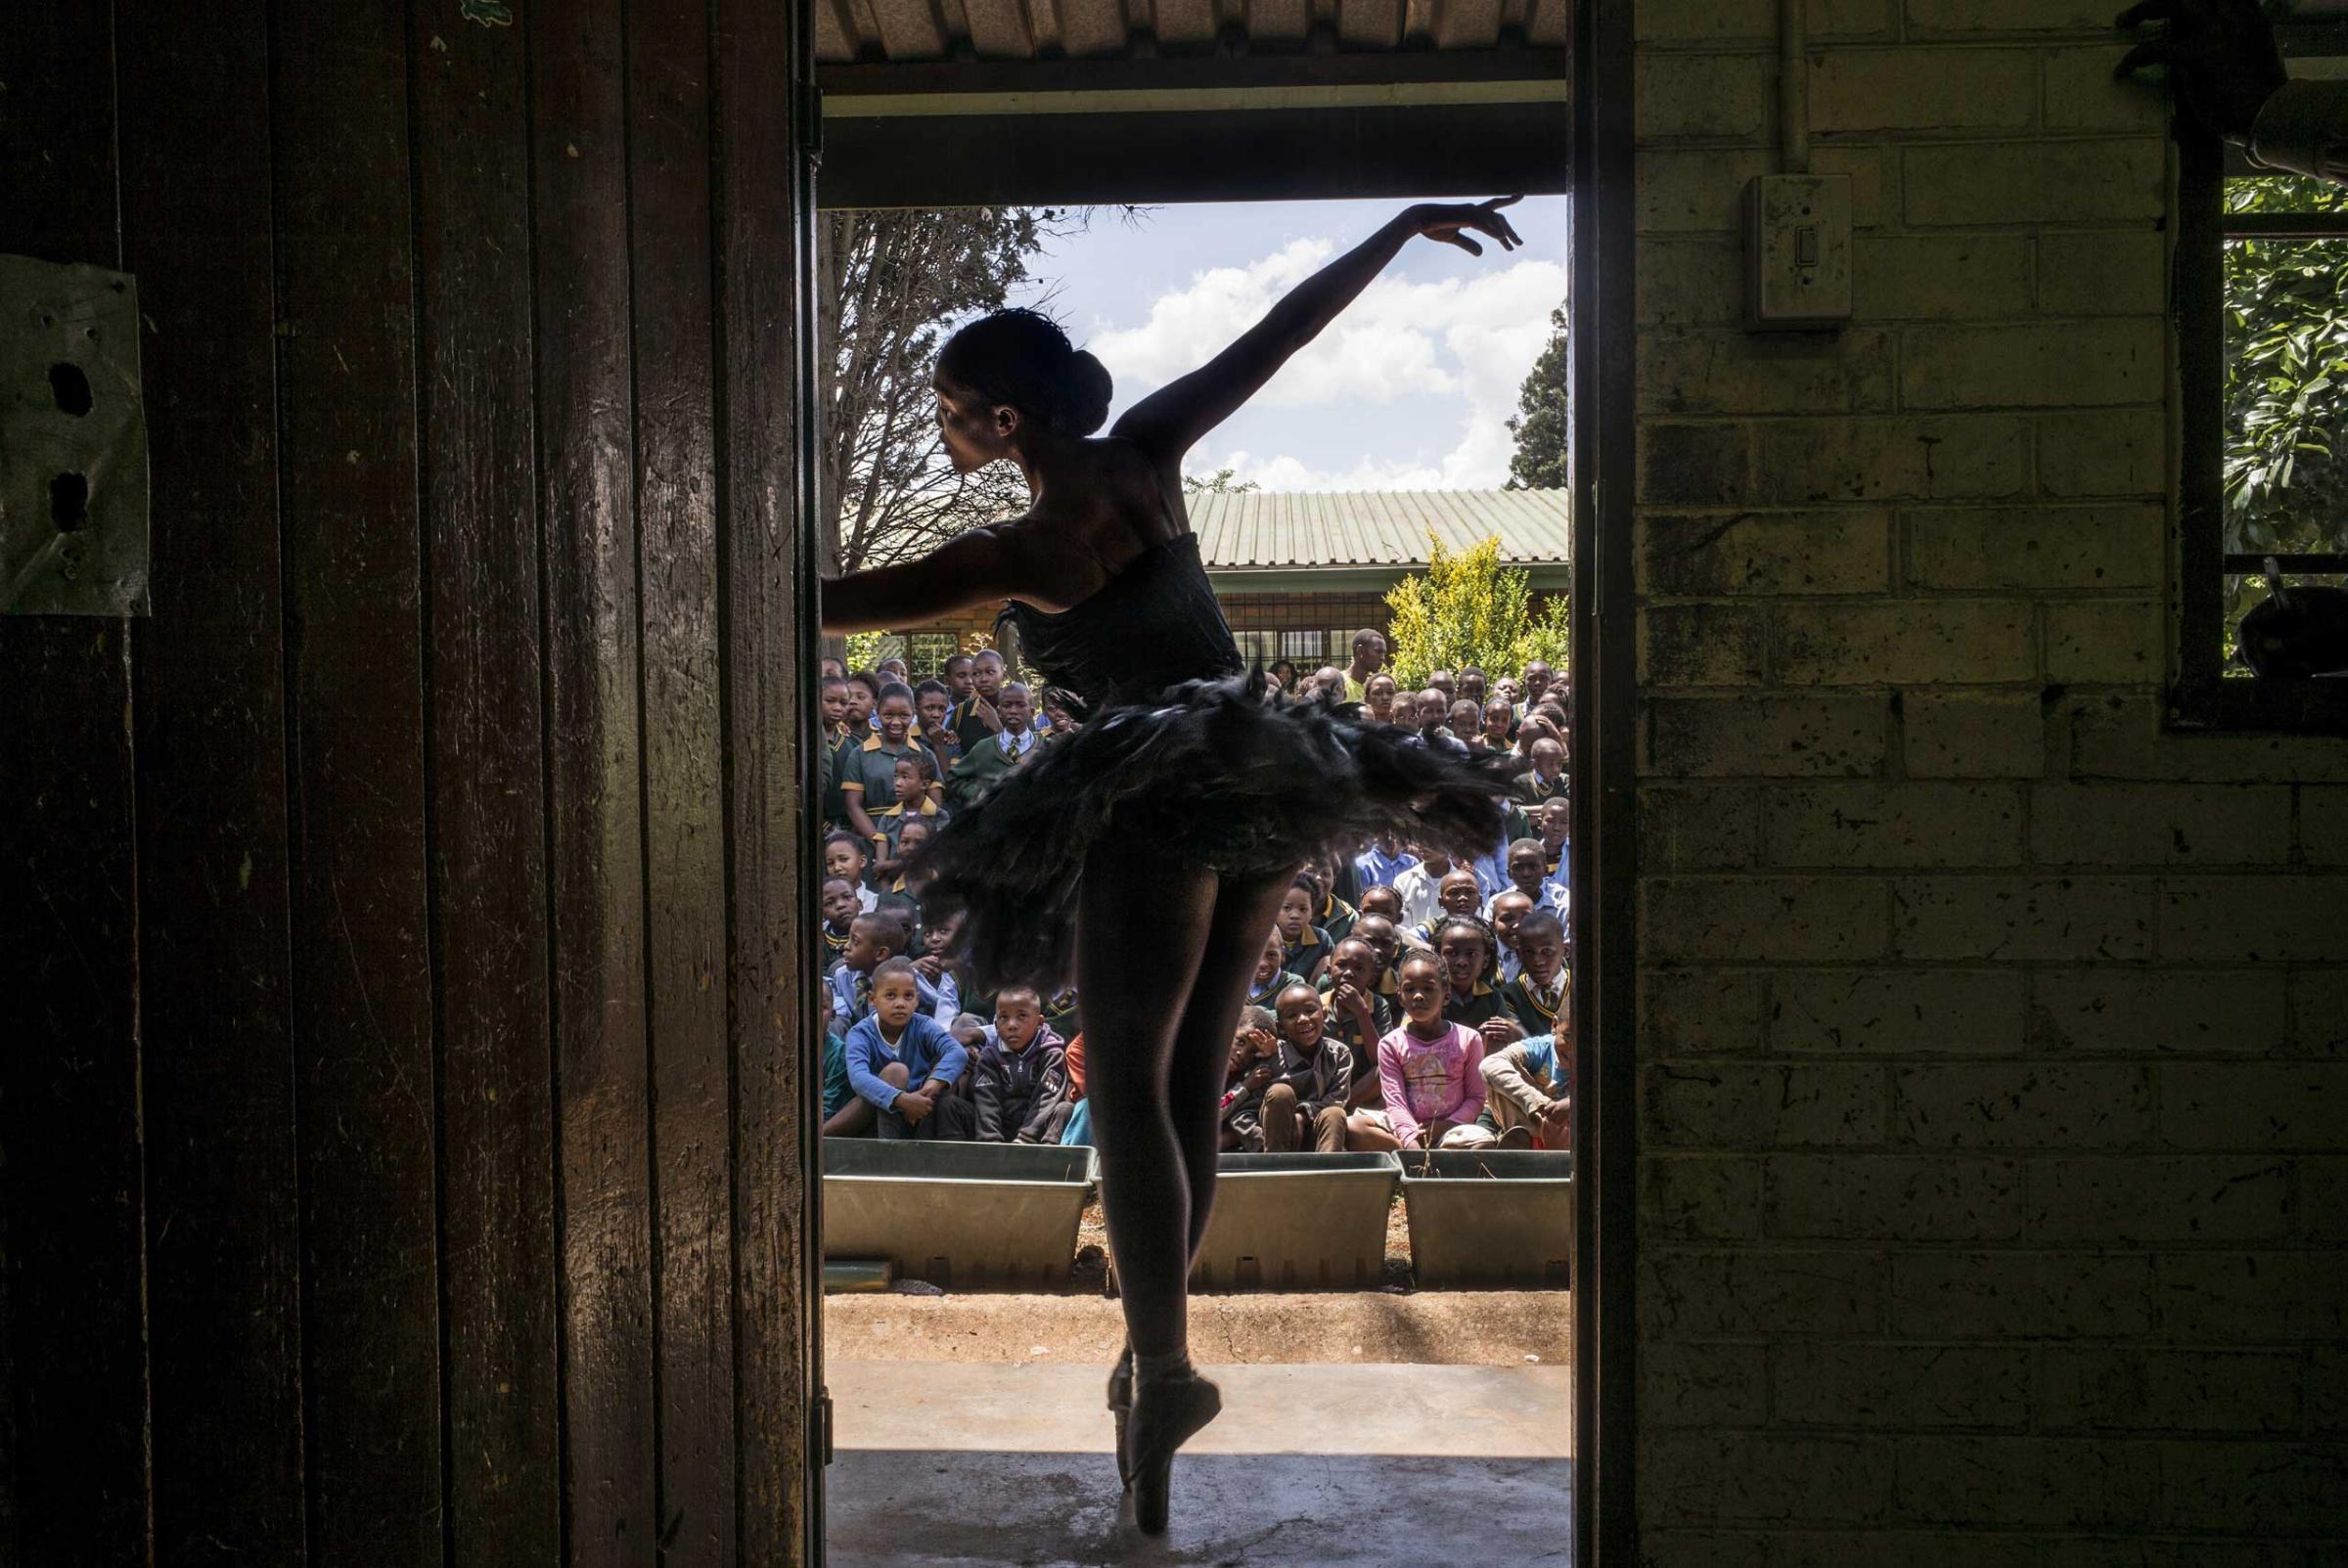 Senior soloist of the Joburg Ballet Kitty Phetla performs in a classroom at the Nka-Thuto Primary School in Soweto on Oct. 16, 2014.